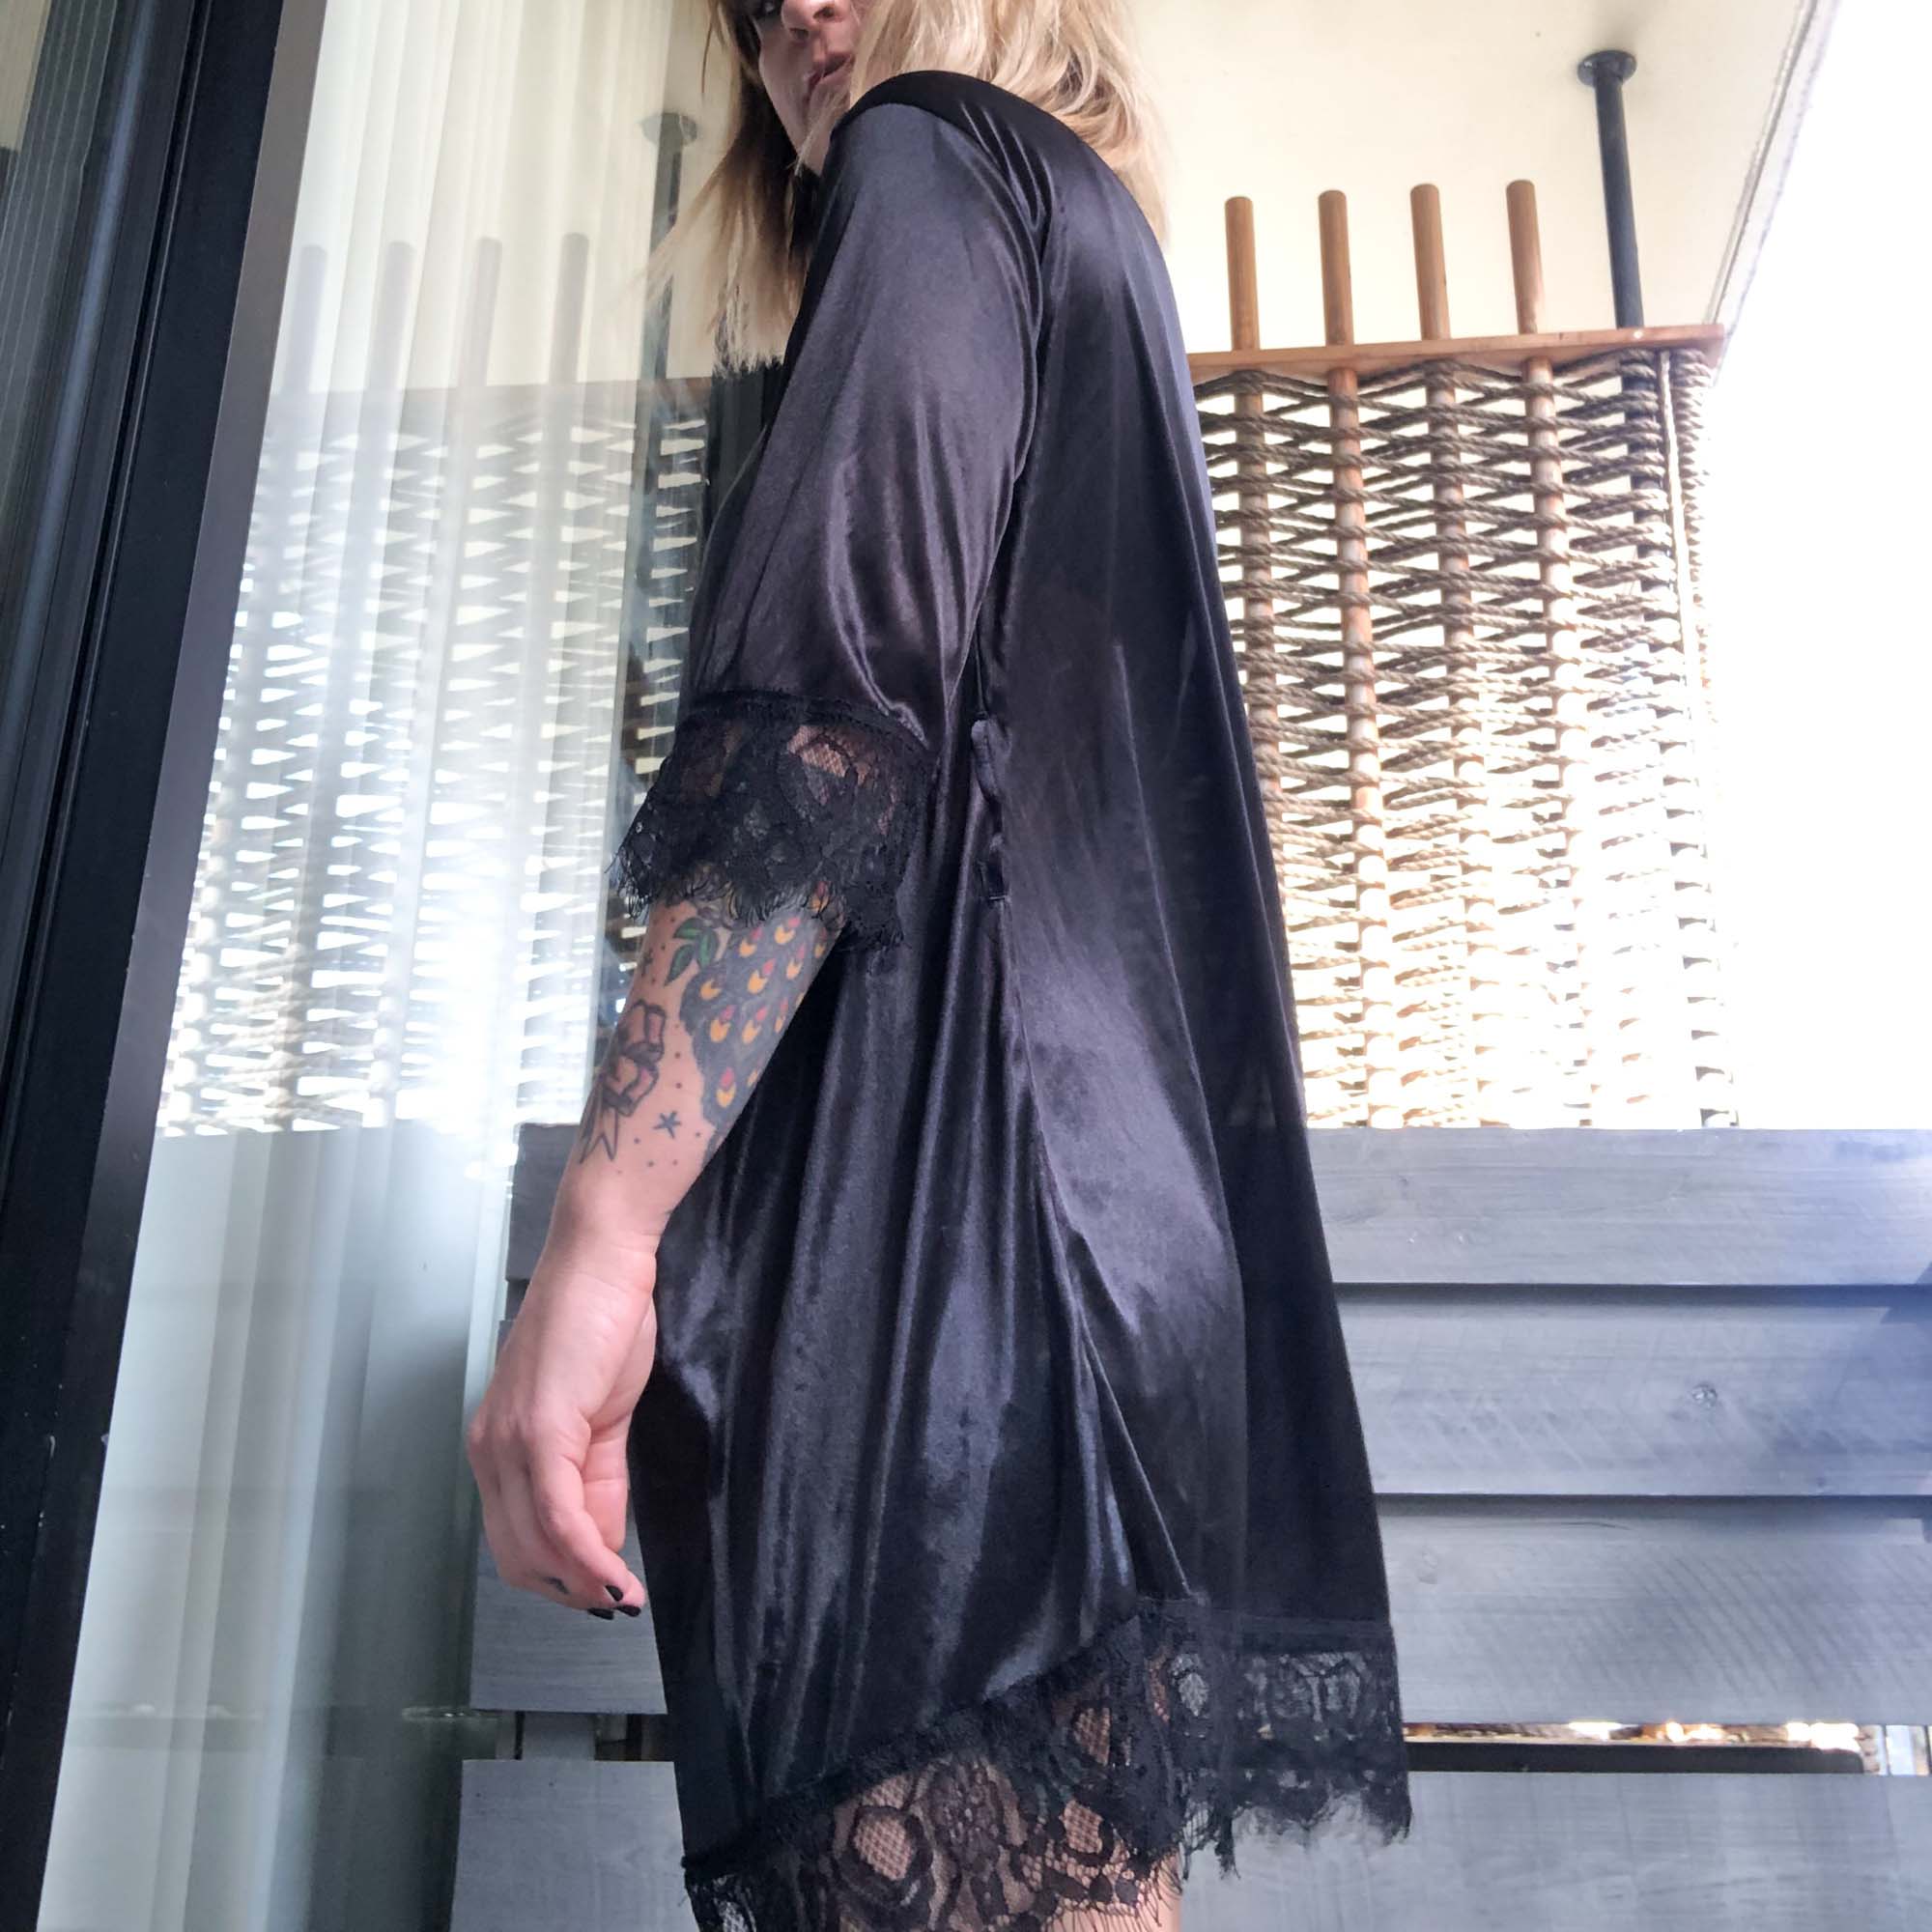 VINTAGE BLACK LACE TRIM SLIP THE ROBE YOU'VE BEEN LOOKING FOR